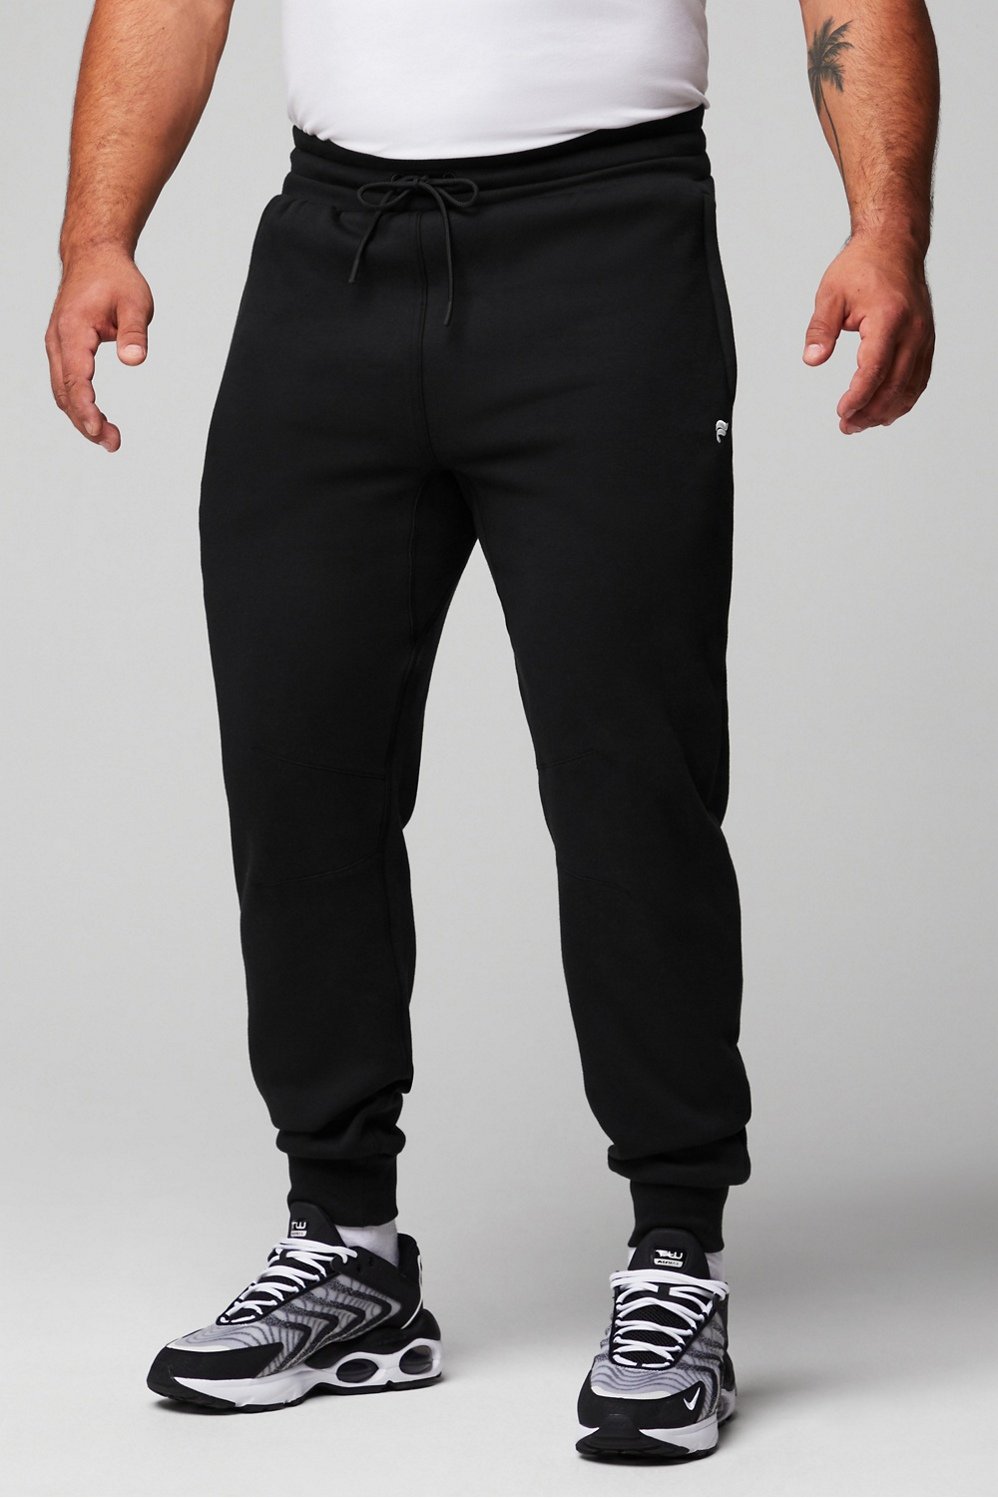 Fabletics - Meet the Maj Pant! (AKA our new jogger that